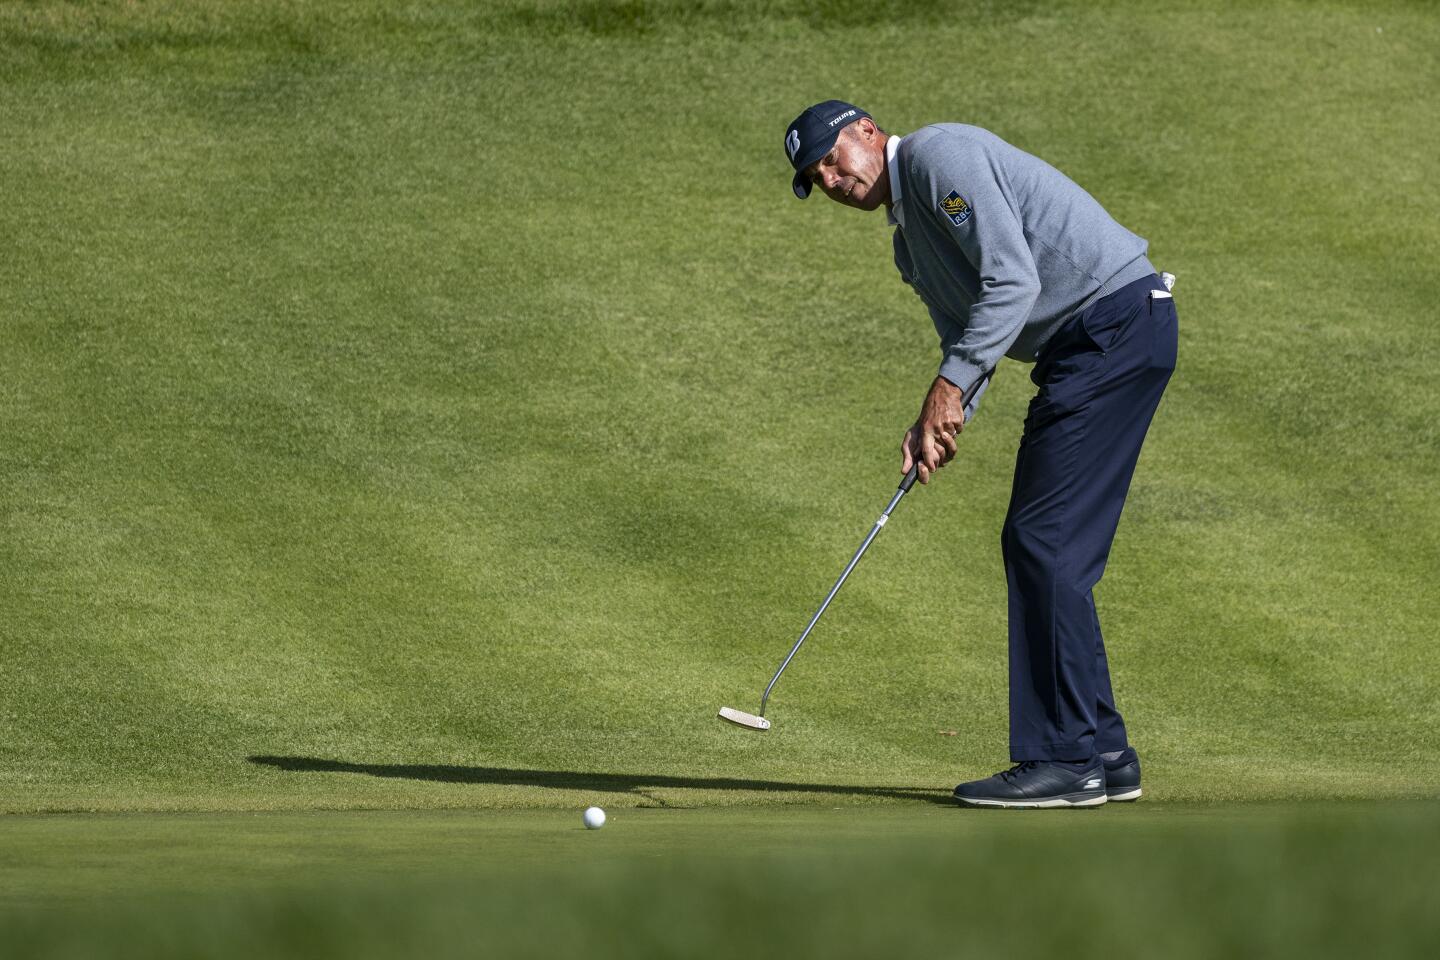 Matt Kuchar sinks a putt for par on the second green during the first round of the Genesis Invitational at Riviera Country Club on Feb. 13, 2020.